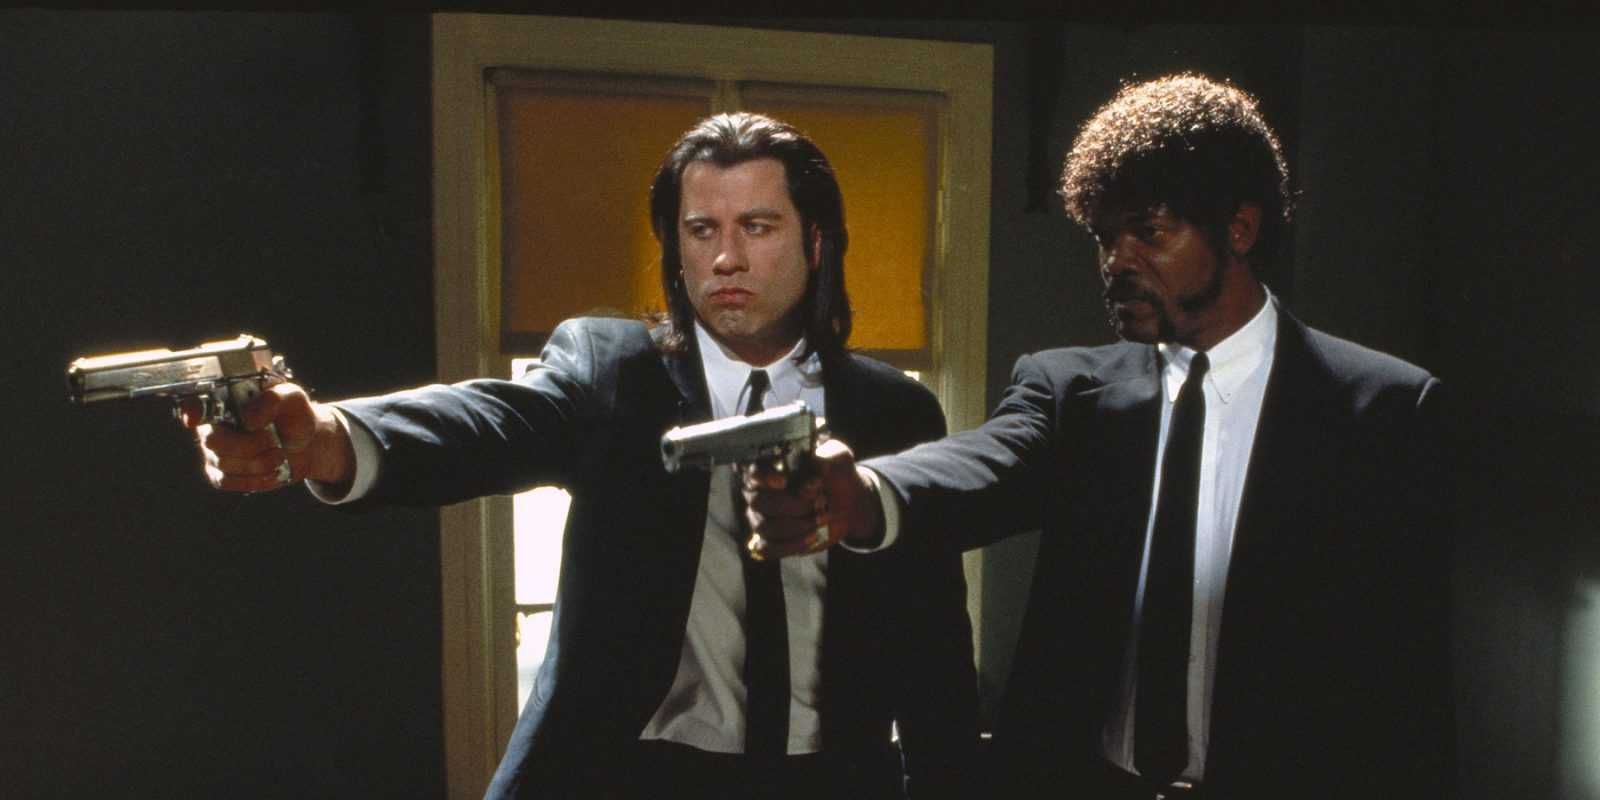 Pulp Fiction Duo